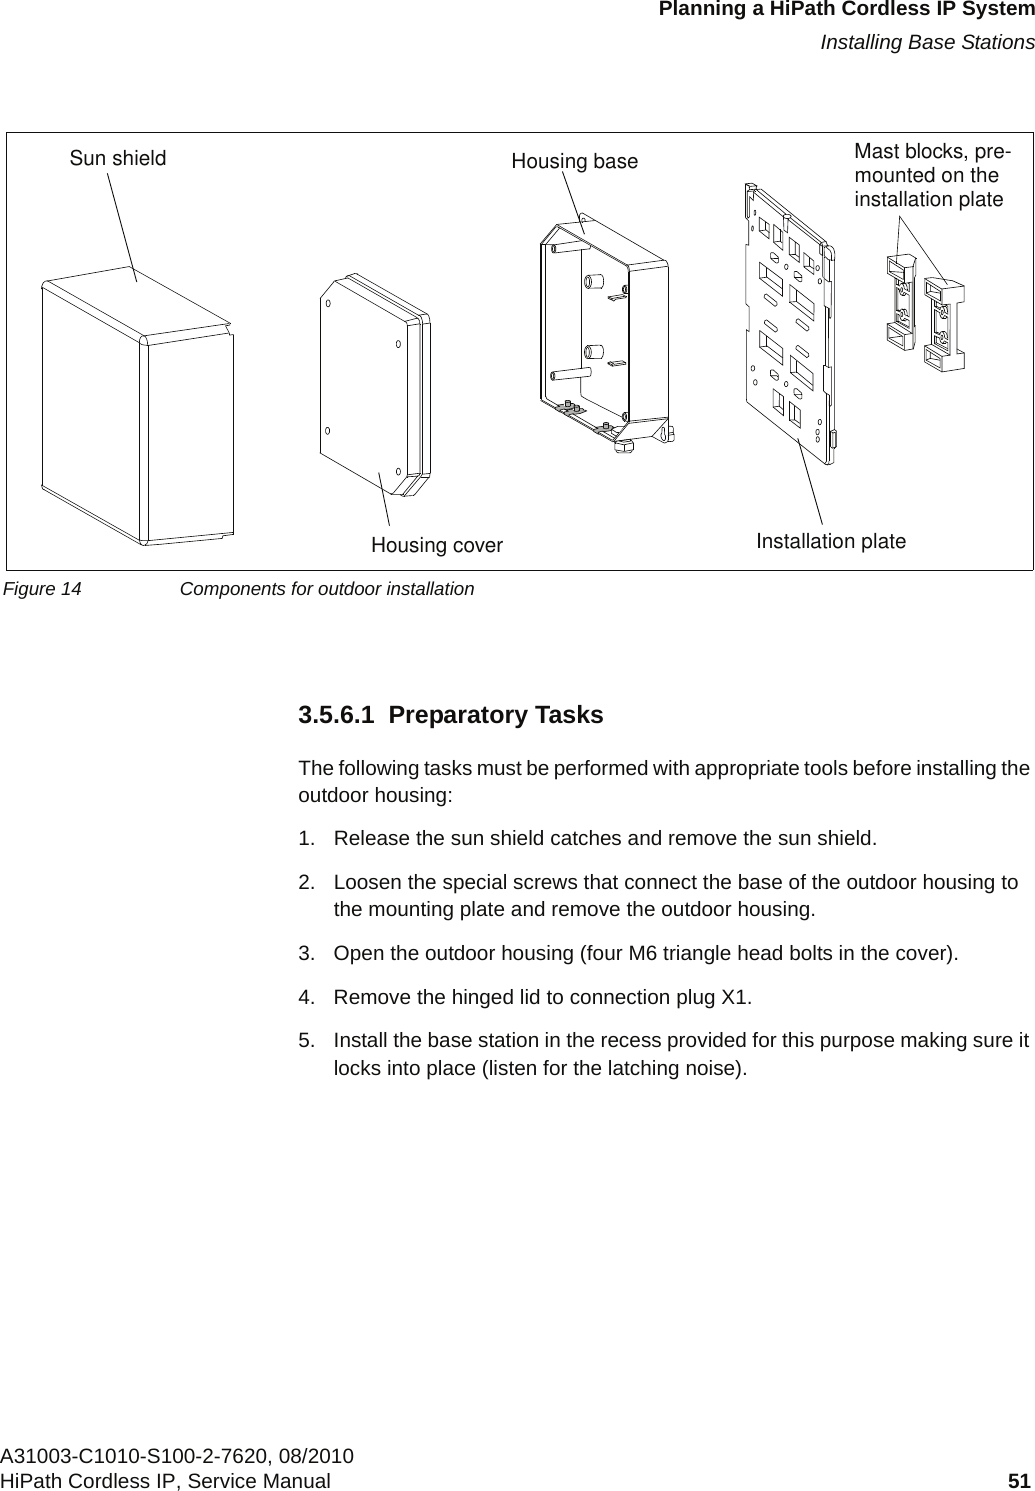 c03.fmPlanning a HiPath Cordless IP SystemInstalling Base StationsA31003-C1010-S100-2-7620, 08/2010HiPath Cordless IP, Service Manual 51           3.5.6.1  Preparatory TasksThe following tasks must be performed with appropriate tools before installing the outdoor housing:1. Release the sun shield catches and remove the sun shield. 2. Loosen the special screws that connect the base of the outdoor housing to the mounting plate and remove the outdoor housing.3. Open the outdoor housing (four M6 triangle head bolts in the cover).4. Remove the hinged lid to connection plug X1.5. Install the base station in the recess provided for this purpose making sure it locks into place (listen for the latching noise).Figure 14 Components for outdoor installationSun shield Housing base mounted on theinstallation plateInstallation plateHousing coverMast blocks, pre- 